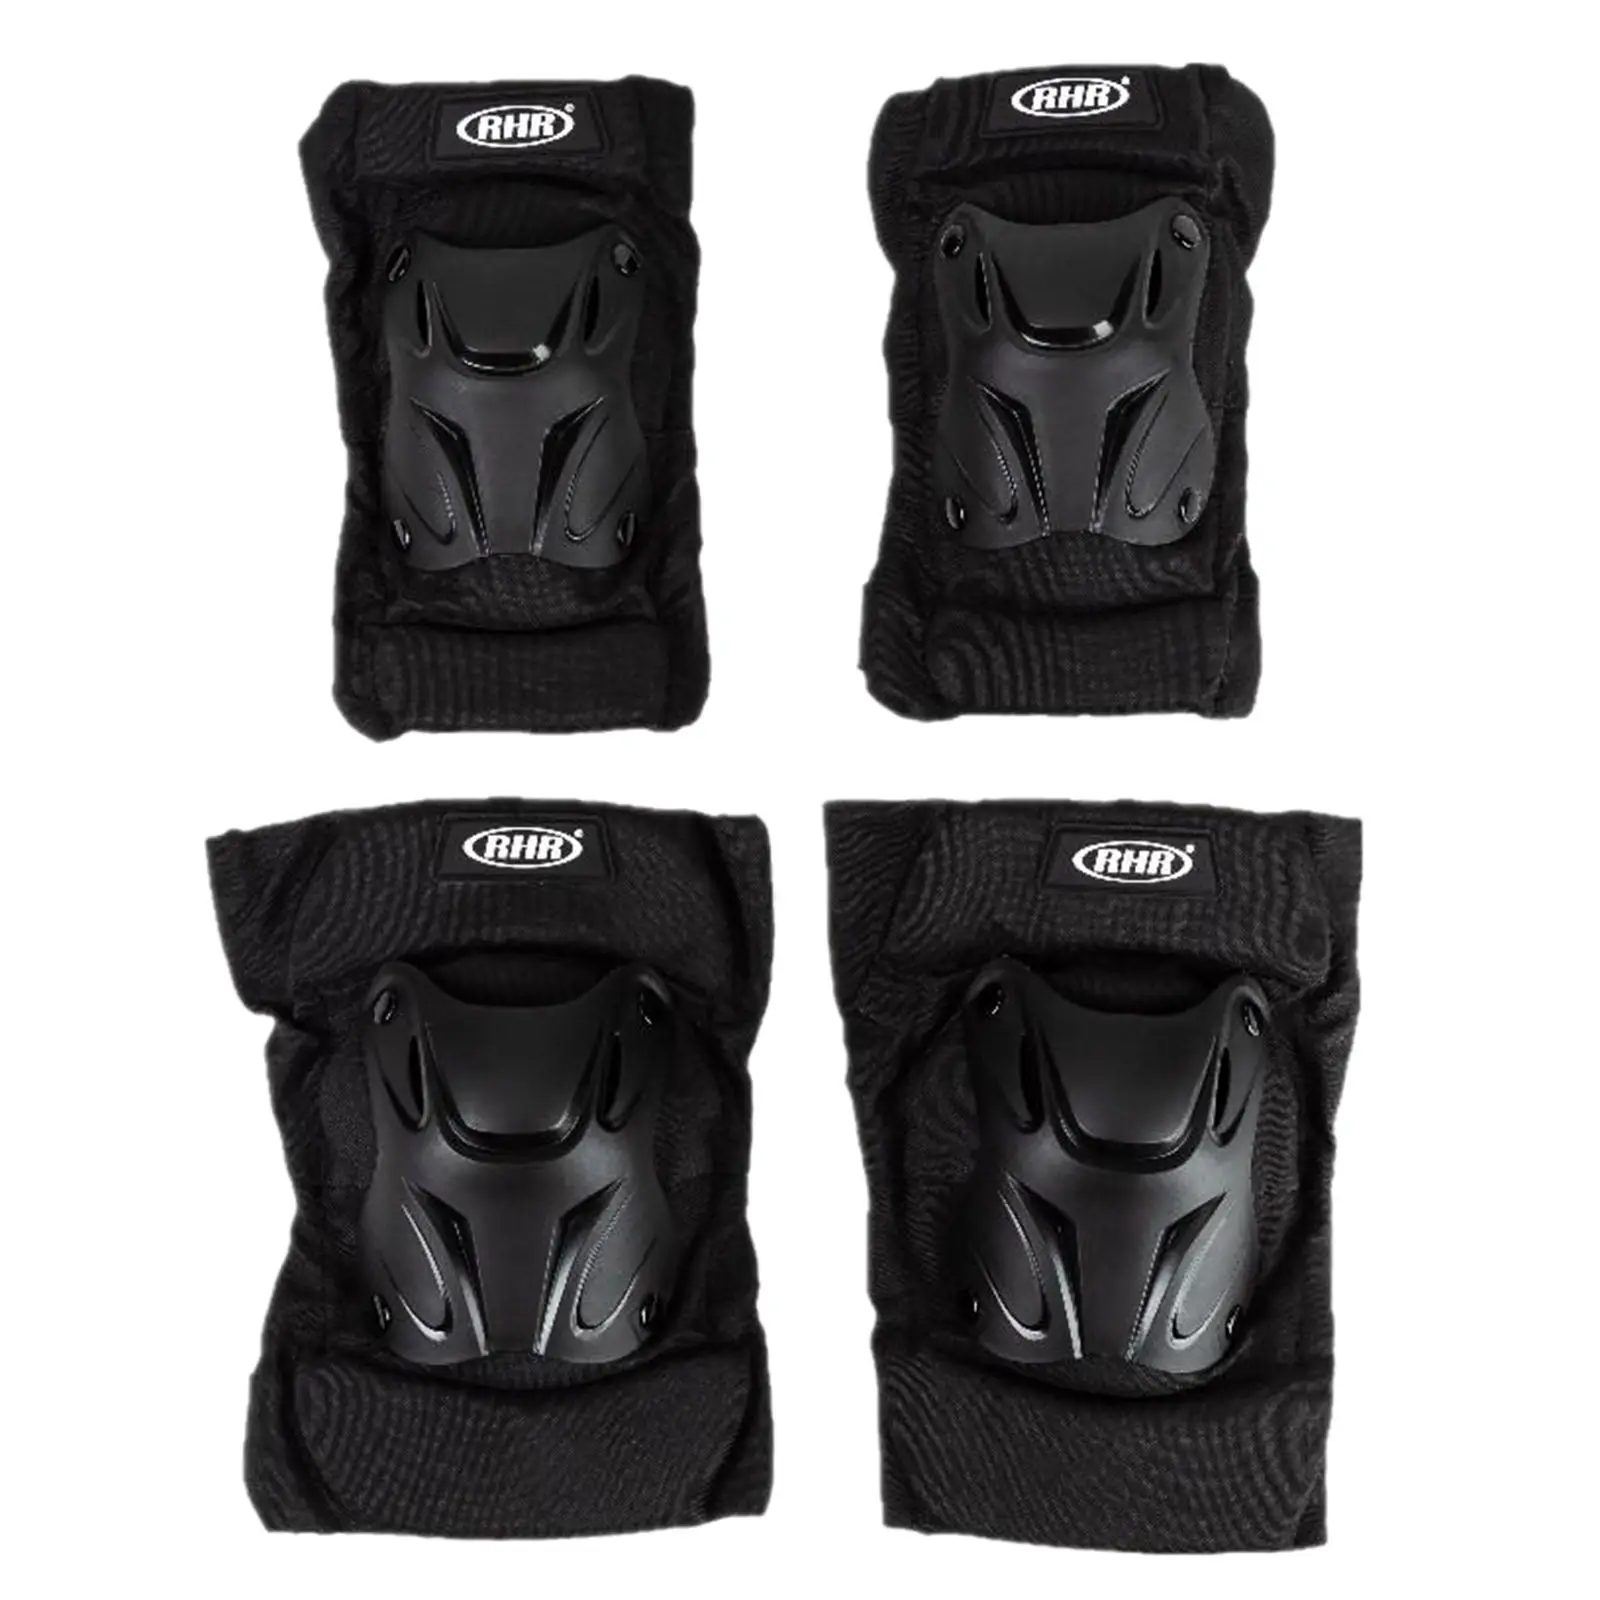 Adult Knee Elbow Pads Guards Braces Safety Skateboard Ski Motocross Motorcycle Knee Protector Support Protection Sports